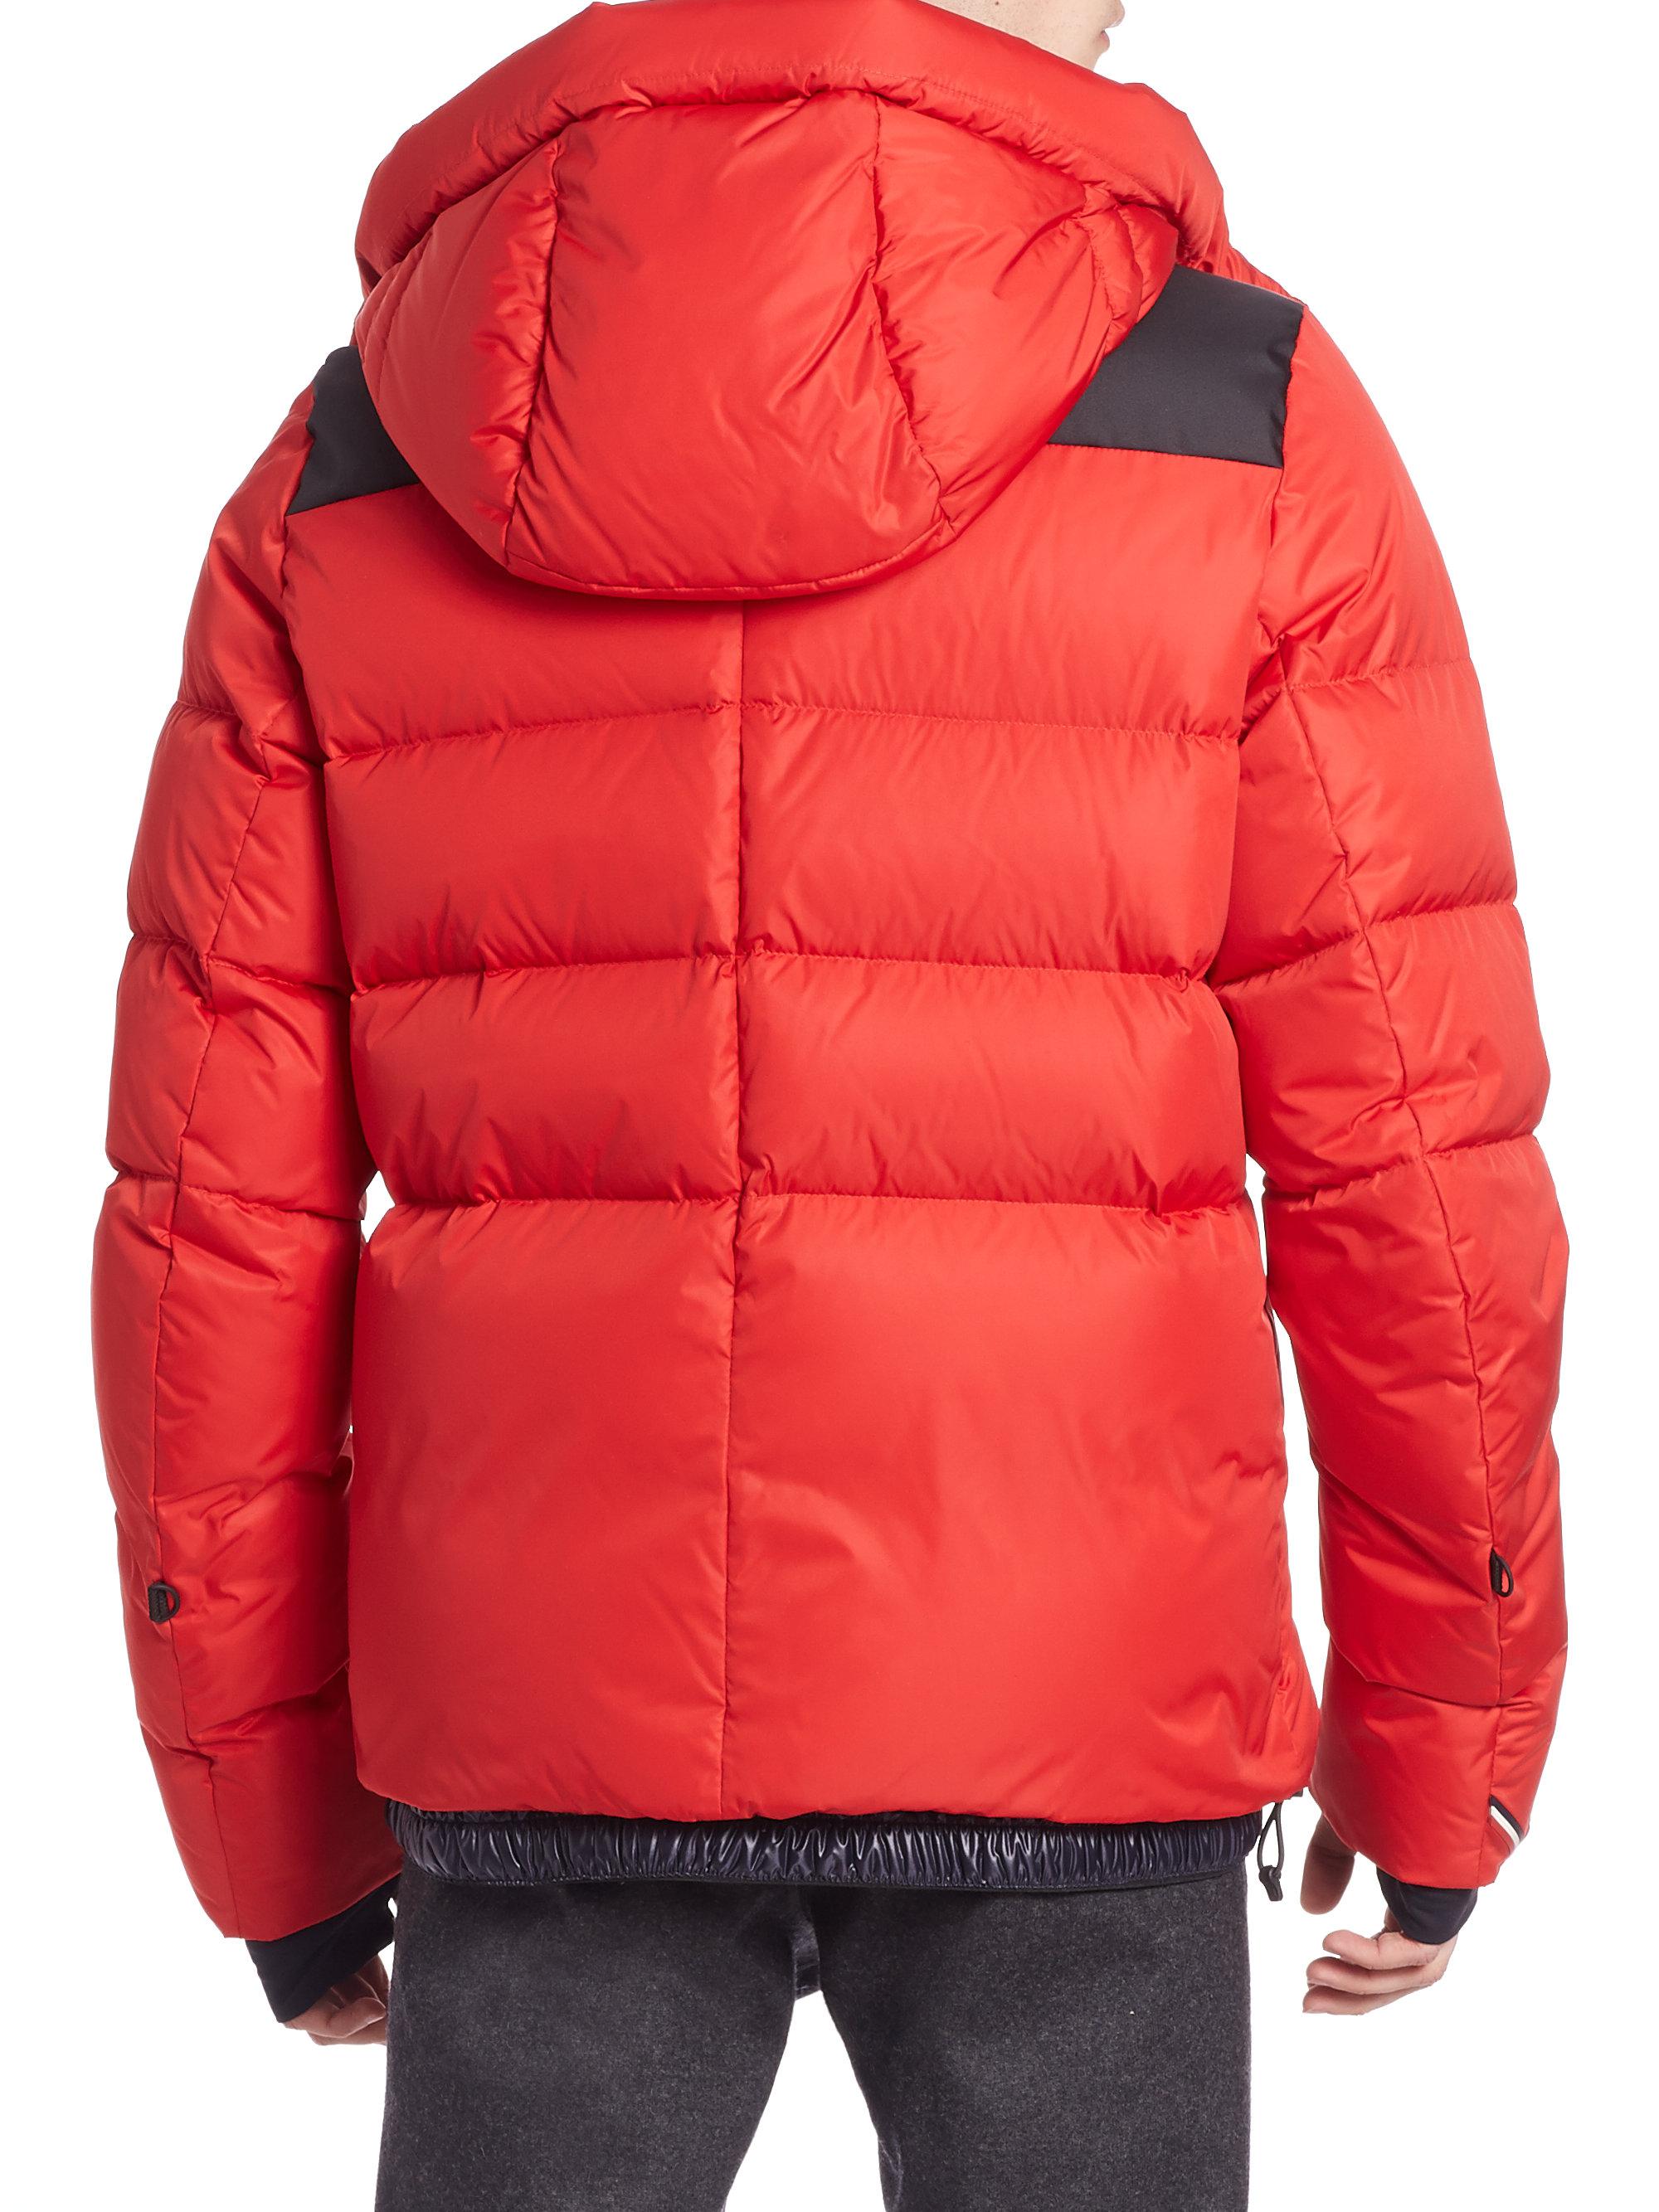 Lyst - Moncler Hooded Puffer Down Jacket in Red for Men